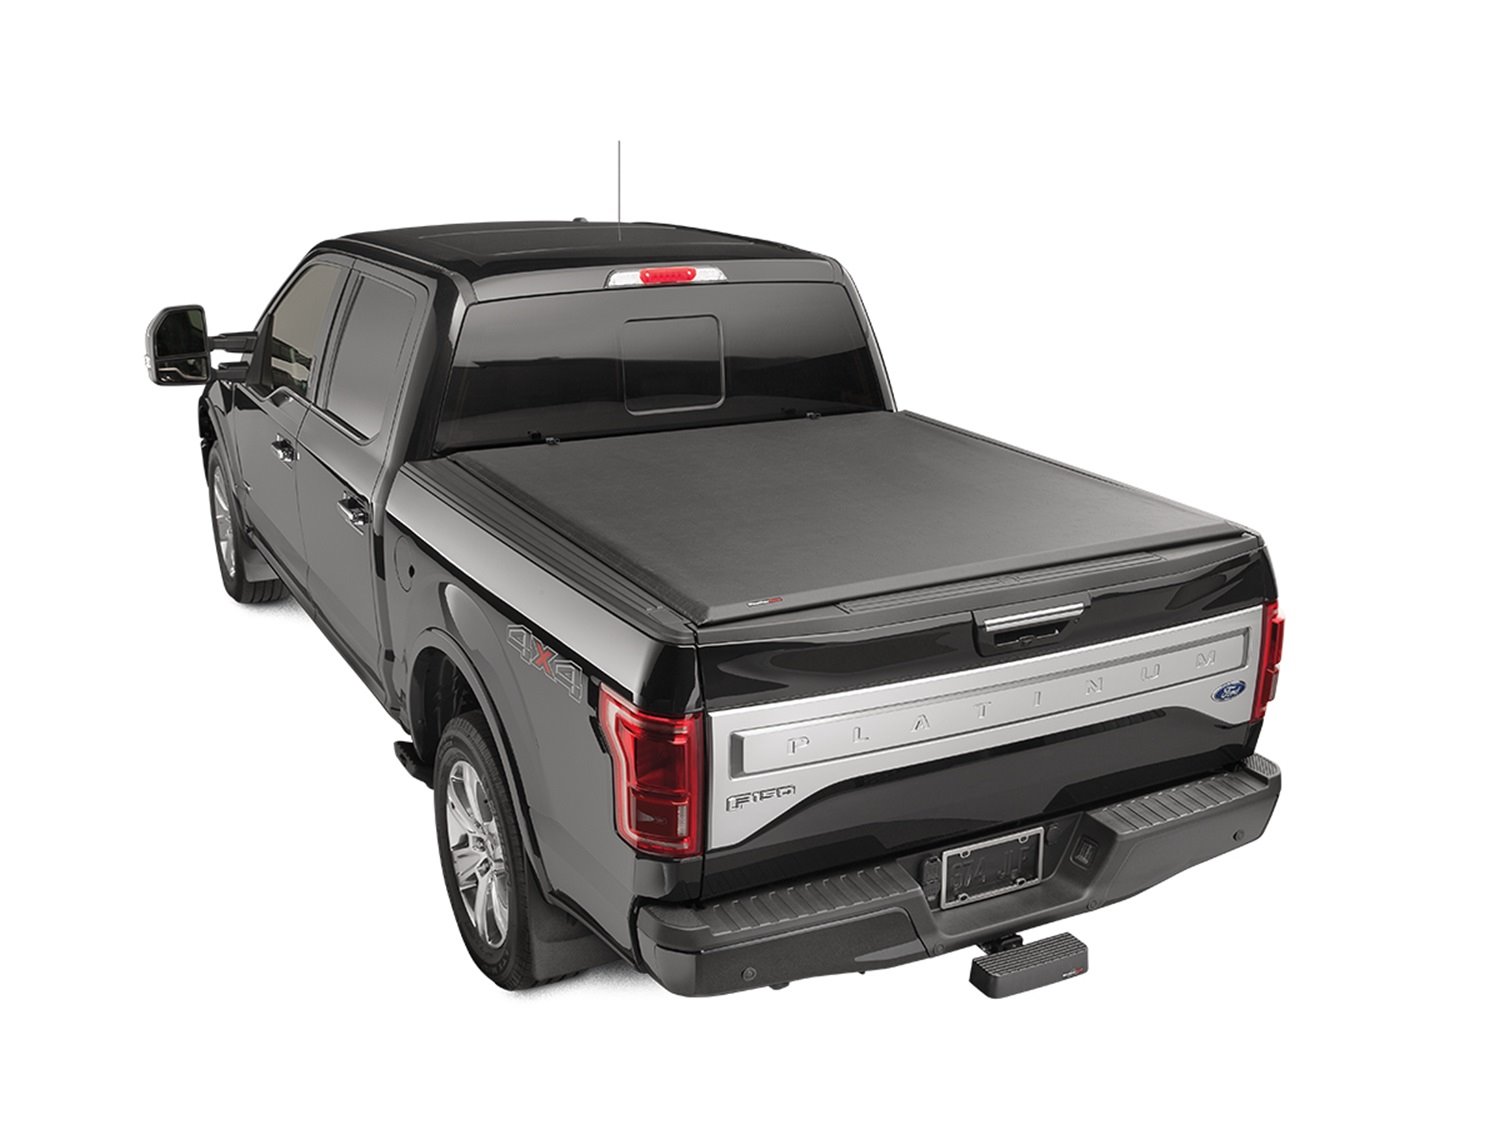 ROLL UP TRUCK BED COVER B TOYOTA TUNDRA 2007-2017 TUNDRA 8 BED W/O DECK RAIL